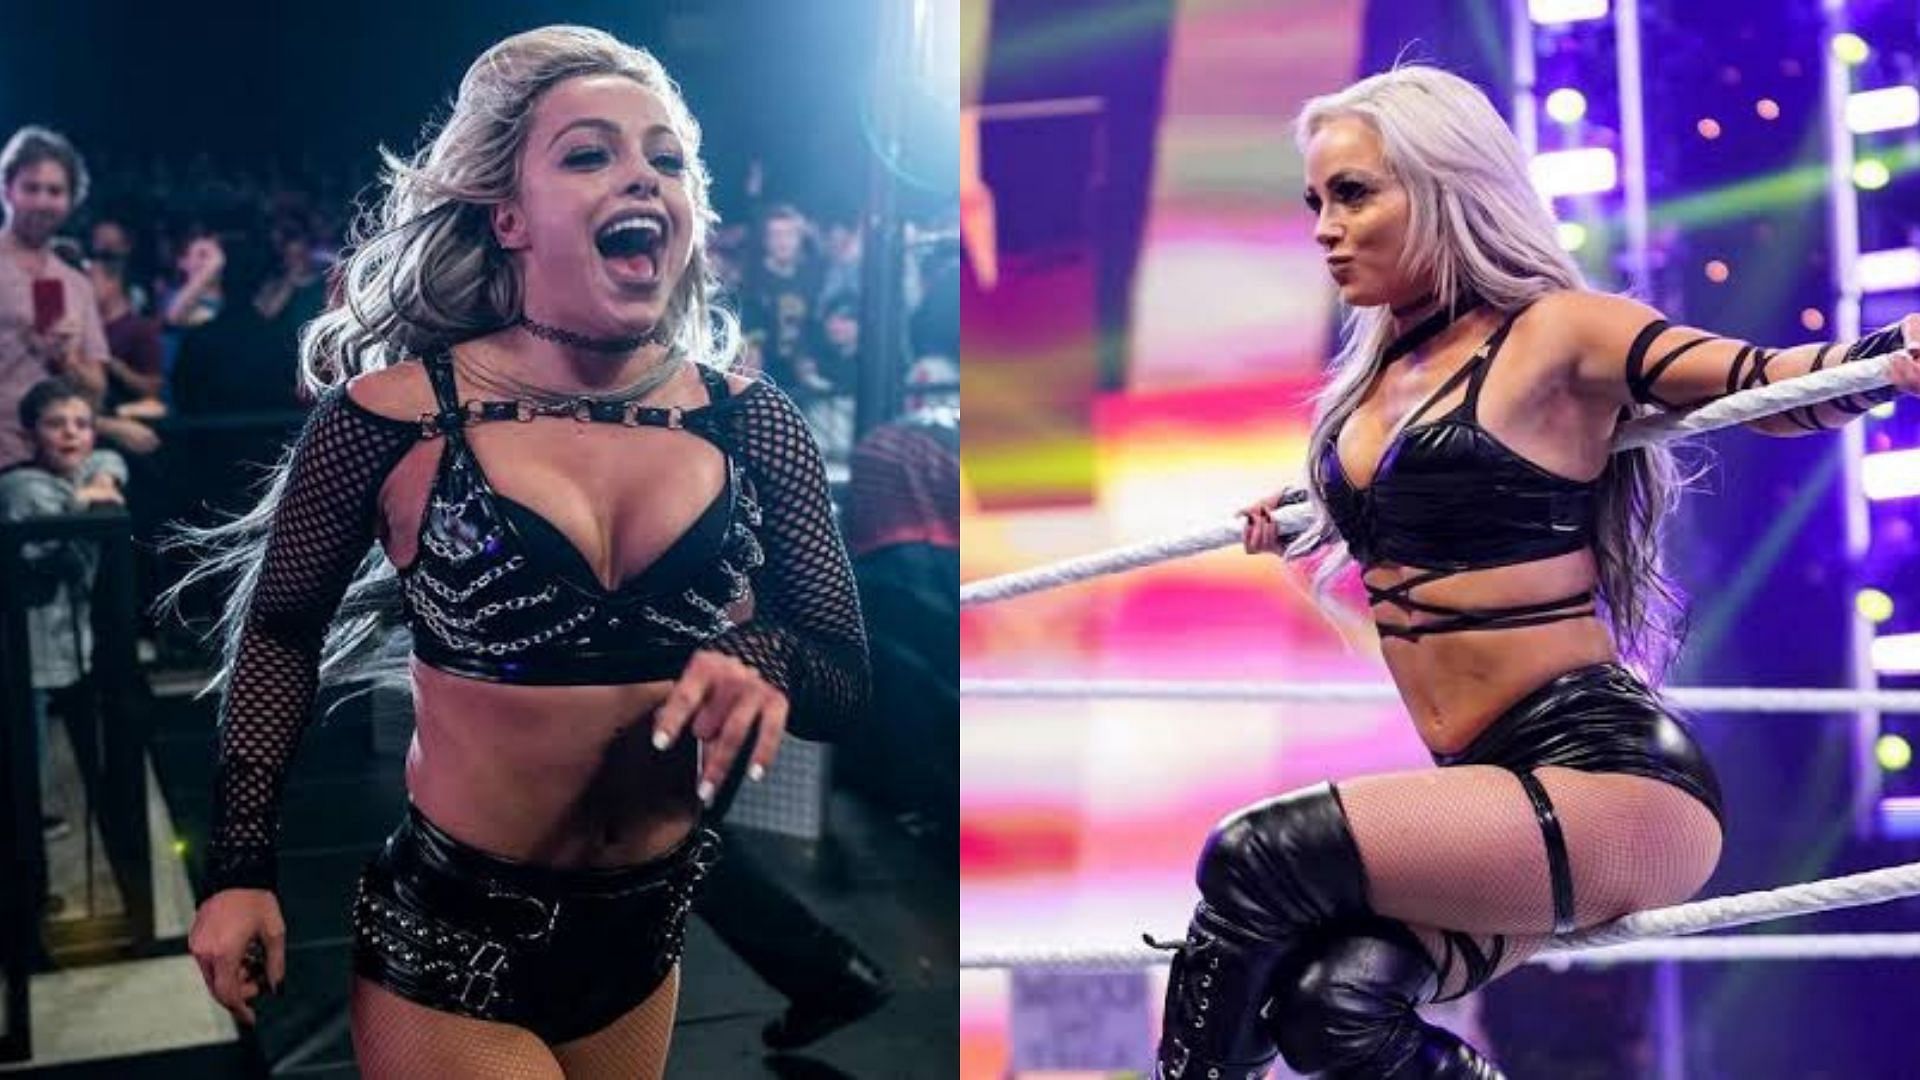 Liv Morgan will be competing in this year&#039;s Women&#039;s Elimination Chamber match